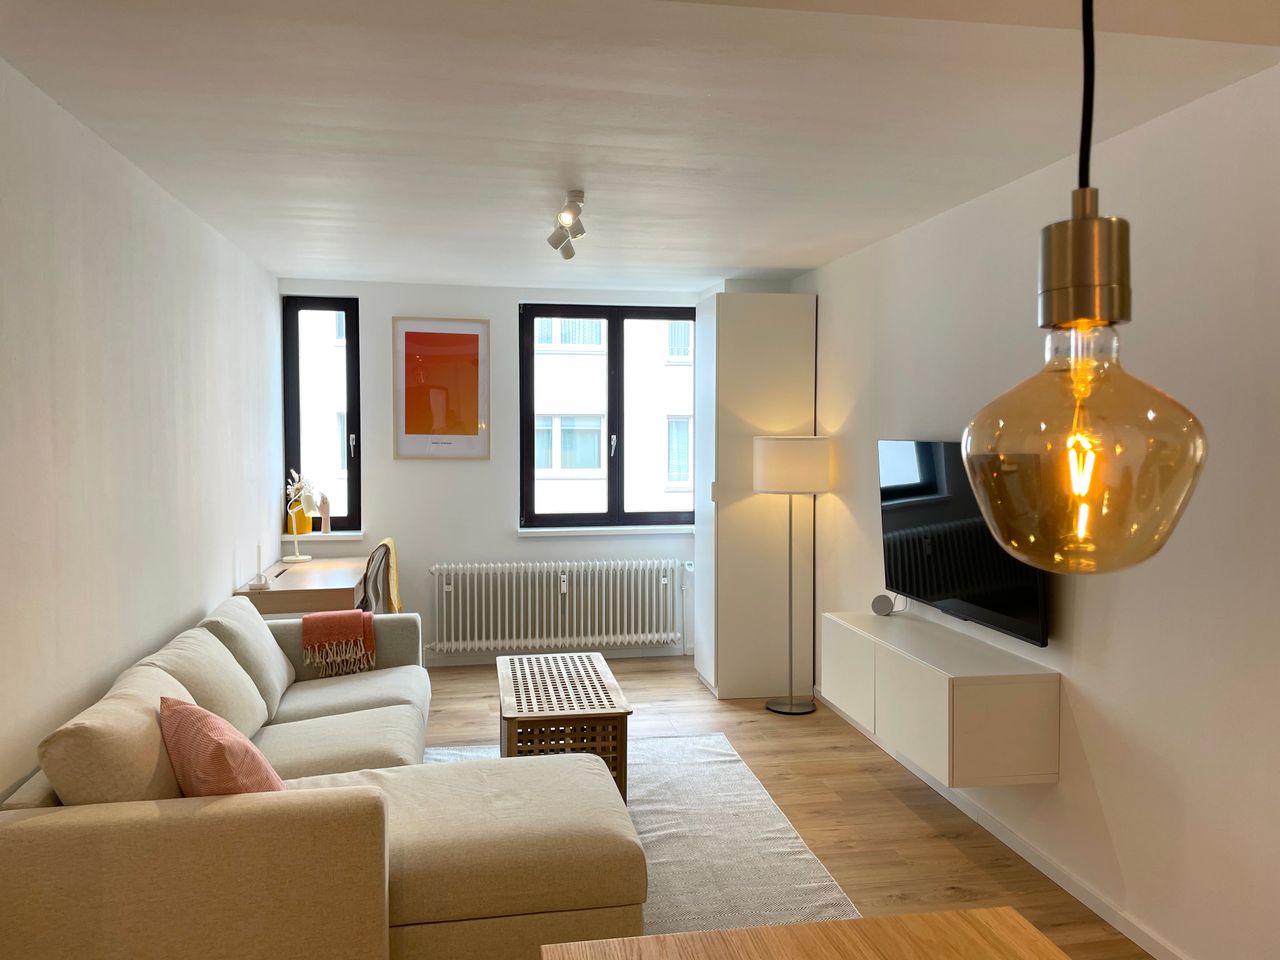 Prime location: Furnished two-room apartment with underground parking space in the most beautiful location of Mainz